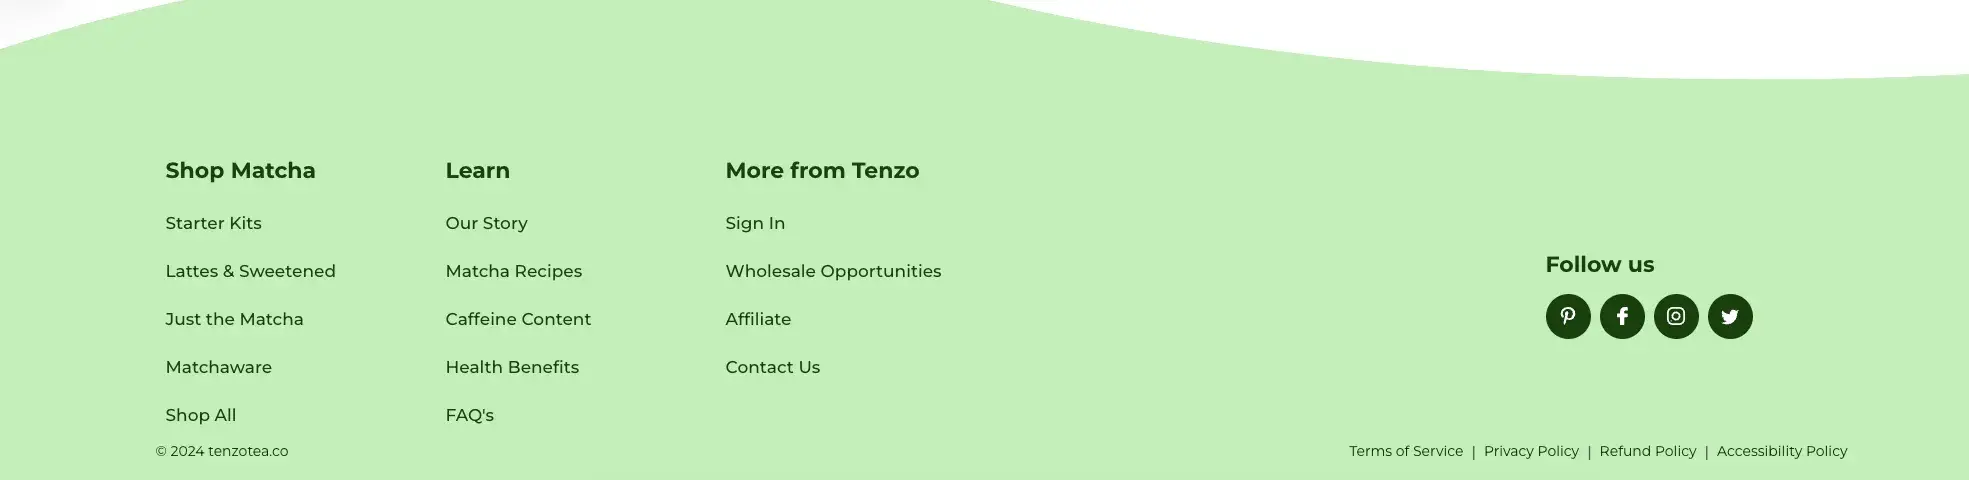 Website footer optimization example from Tenzo